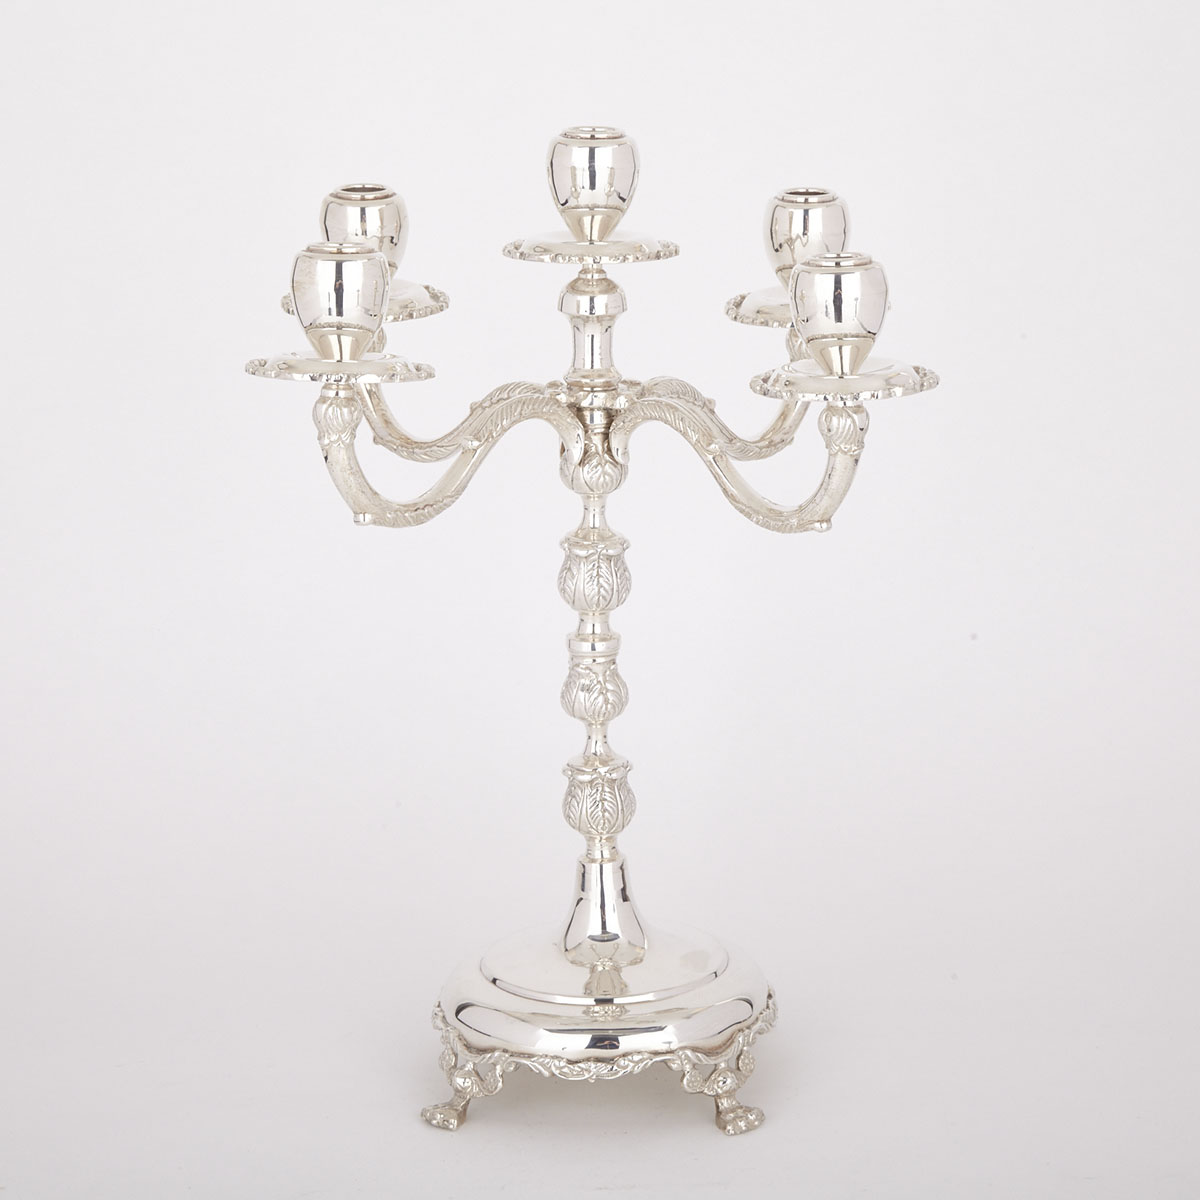 Mexican Silver Five-Light Candelabrum, mid-20th century